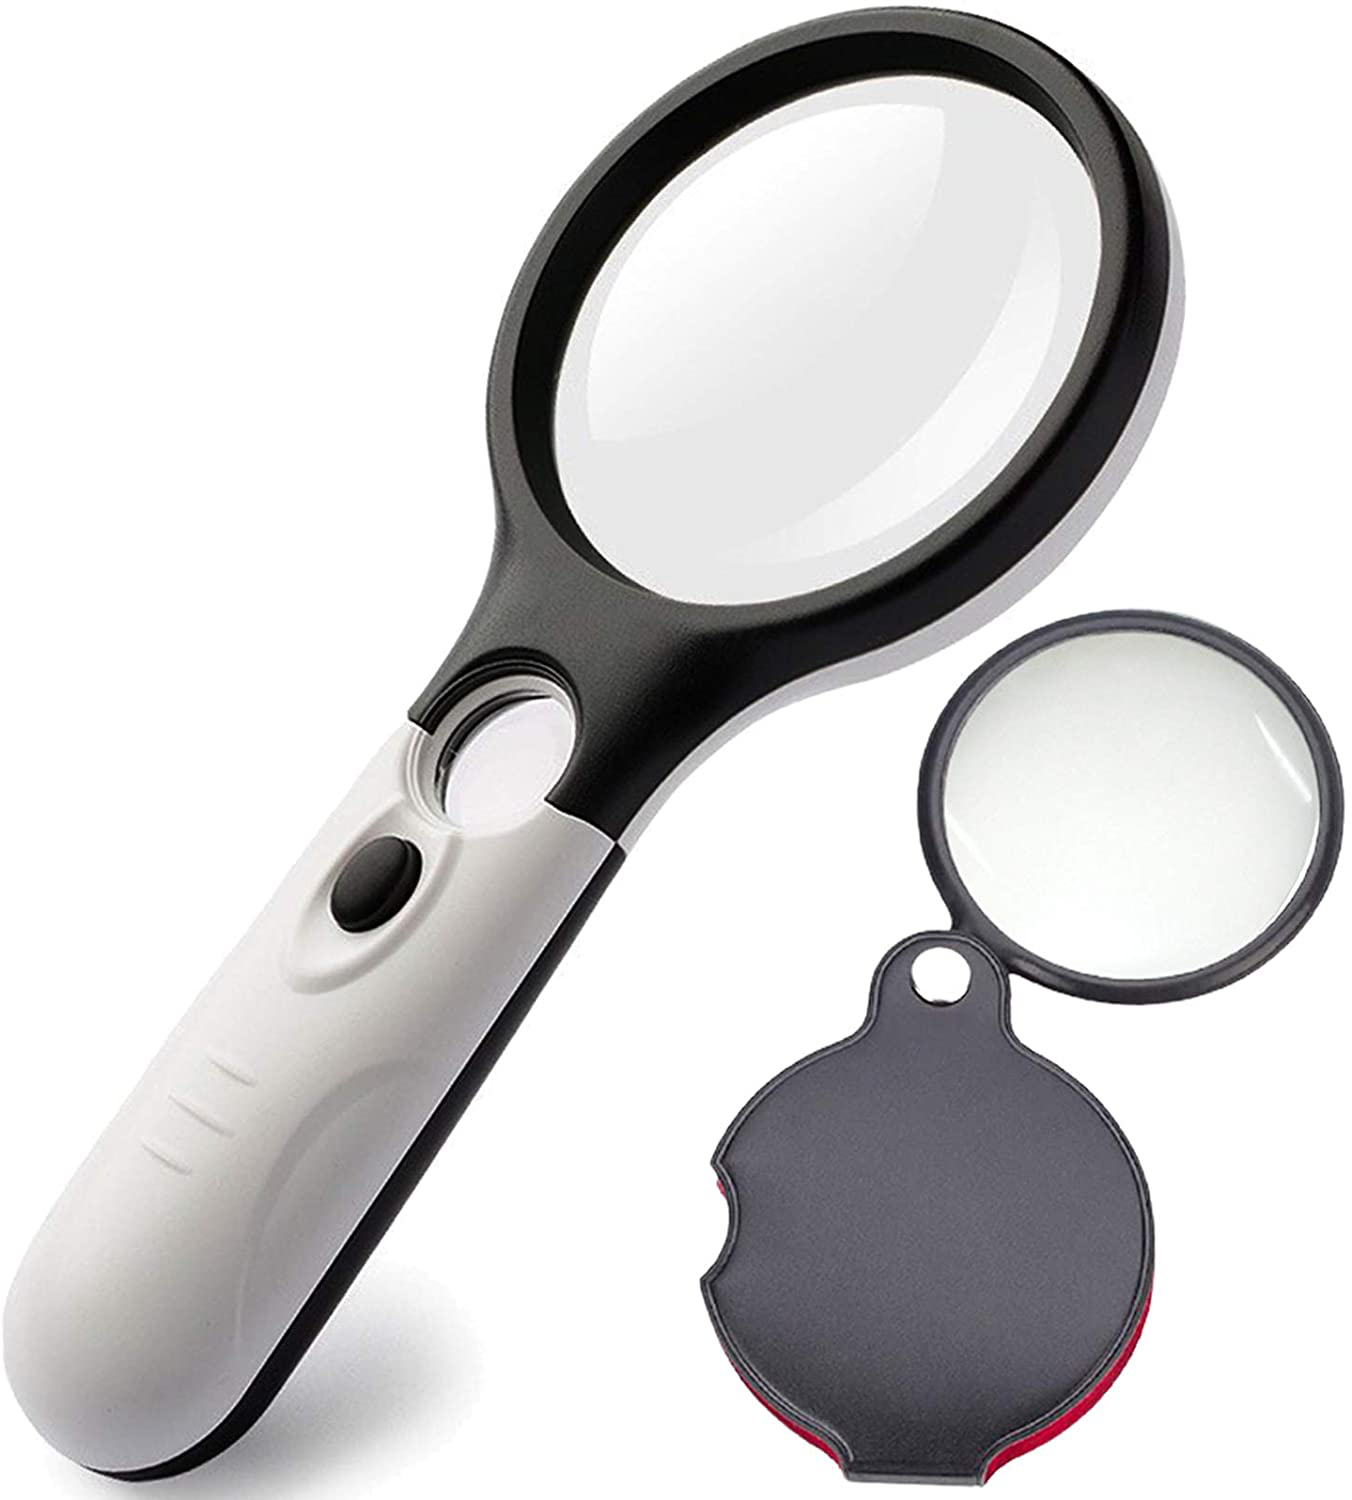 Unbranded - Magnifying glass with light 3x lighted handheld magnifying glasses new